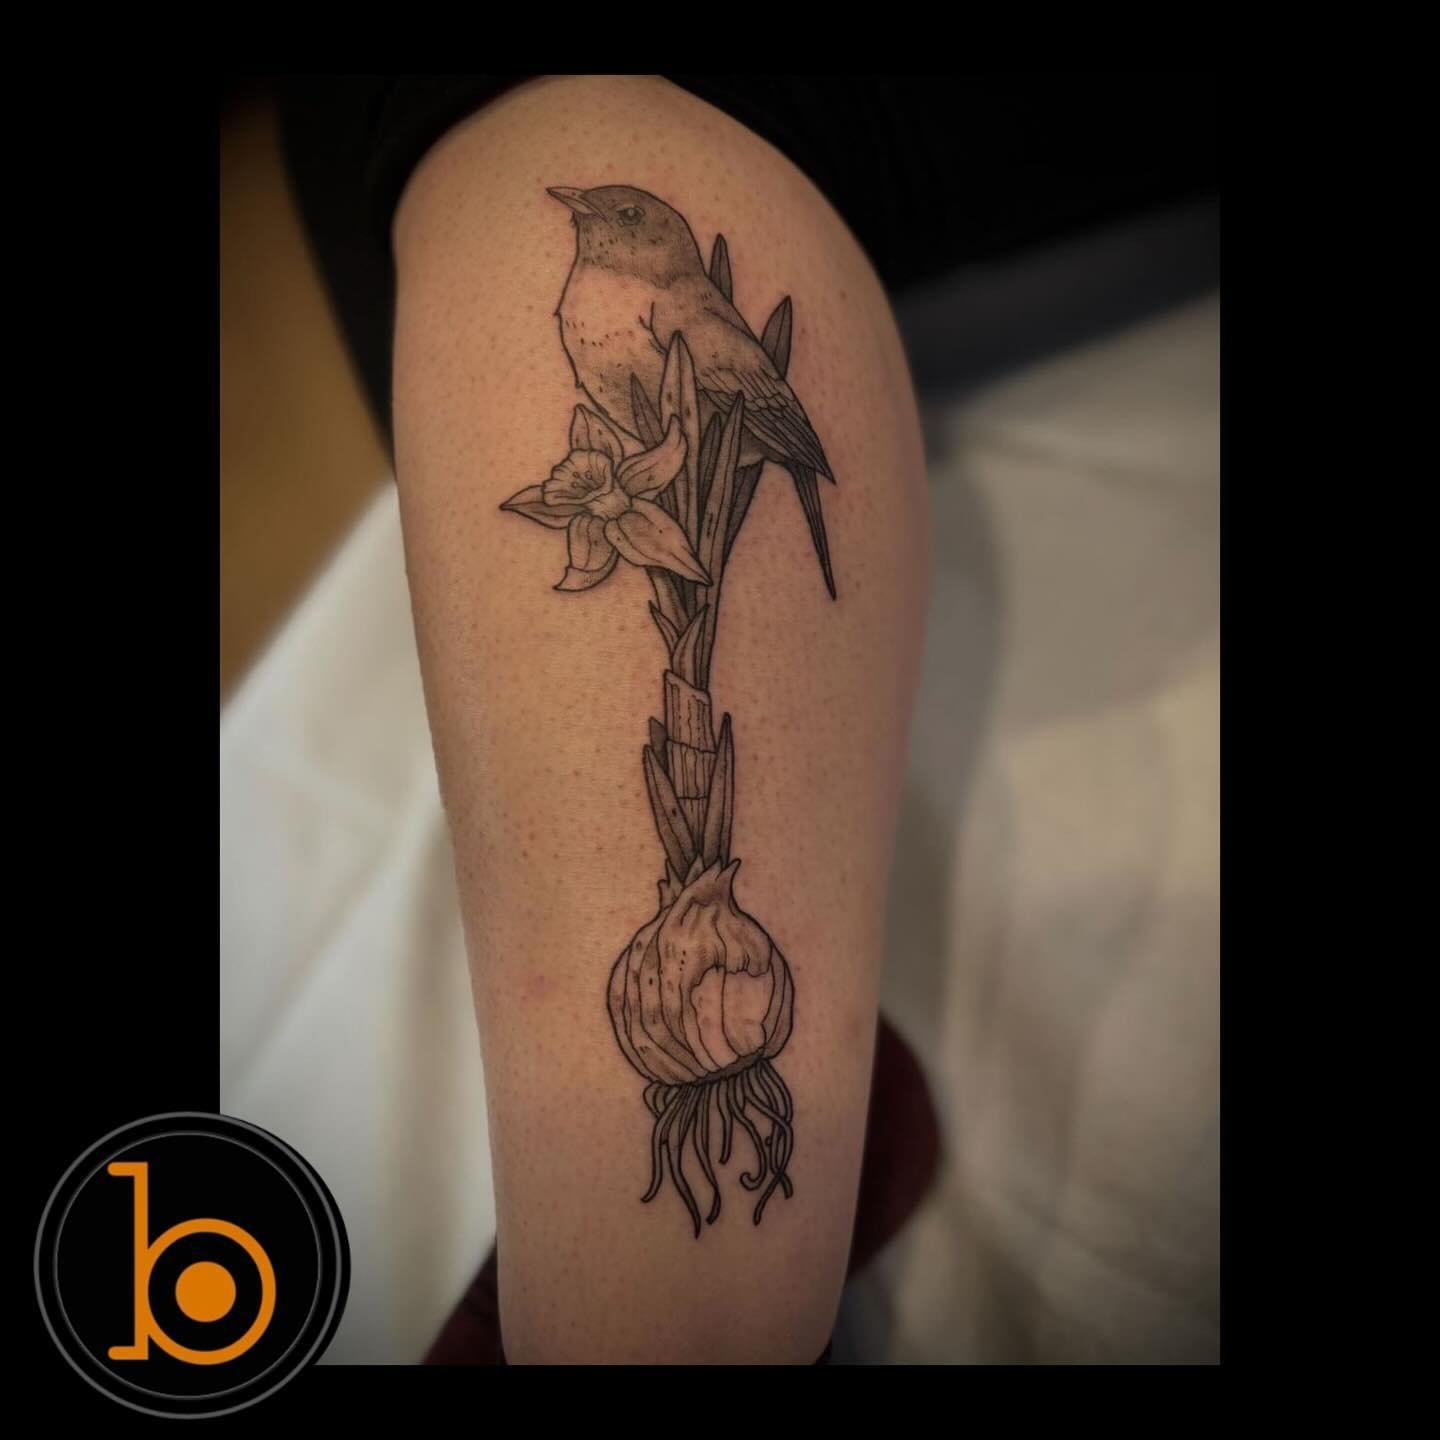 A collection of birds and plants by resident artist @rick.beaupre 🦅🦜🐥🌱🪴🪻
➡️SWIPE➡️ to see it get spooky!
➖➖➖➖➖➖➖➖➖➖➖➖➖➖➖➖➖
Blueprint Gallery
138 Russell St
 Hadley MA 01035
📱(413)-387-0221 
WALK-INS WELCOME 
🕸️ www.blueprintgallery.com 🕸️
⬇️